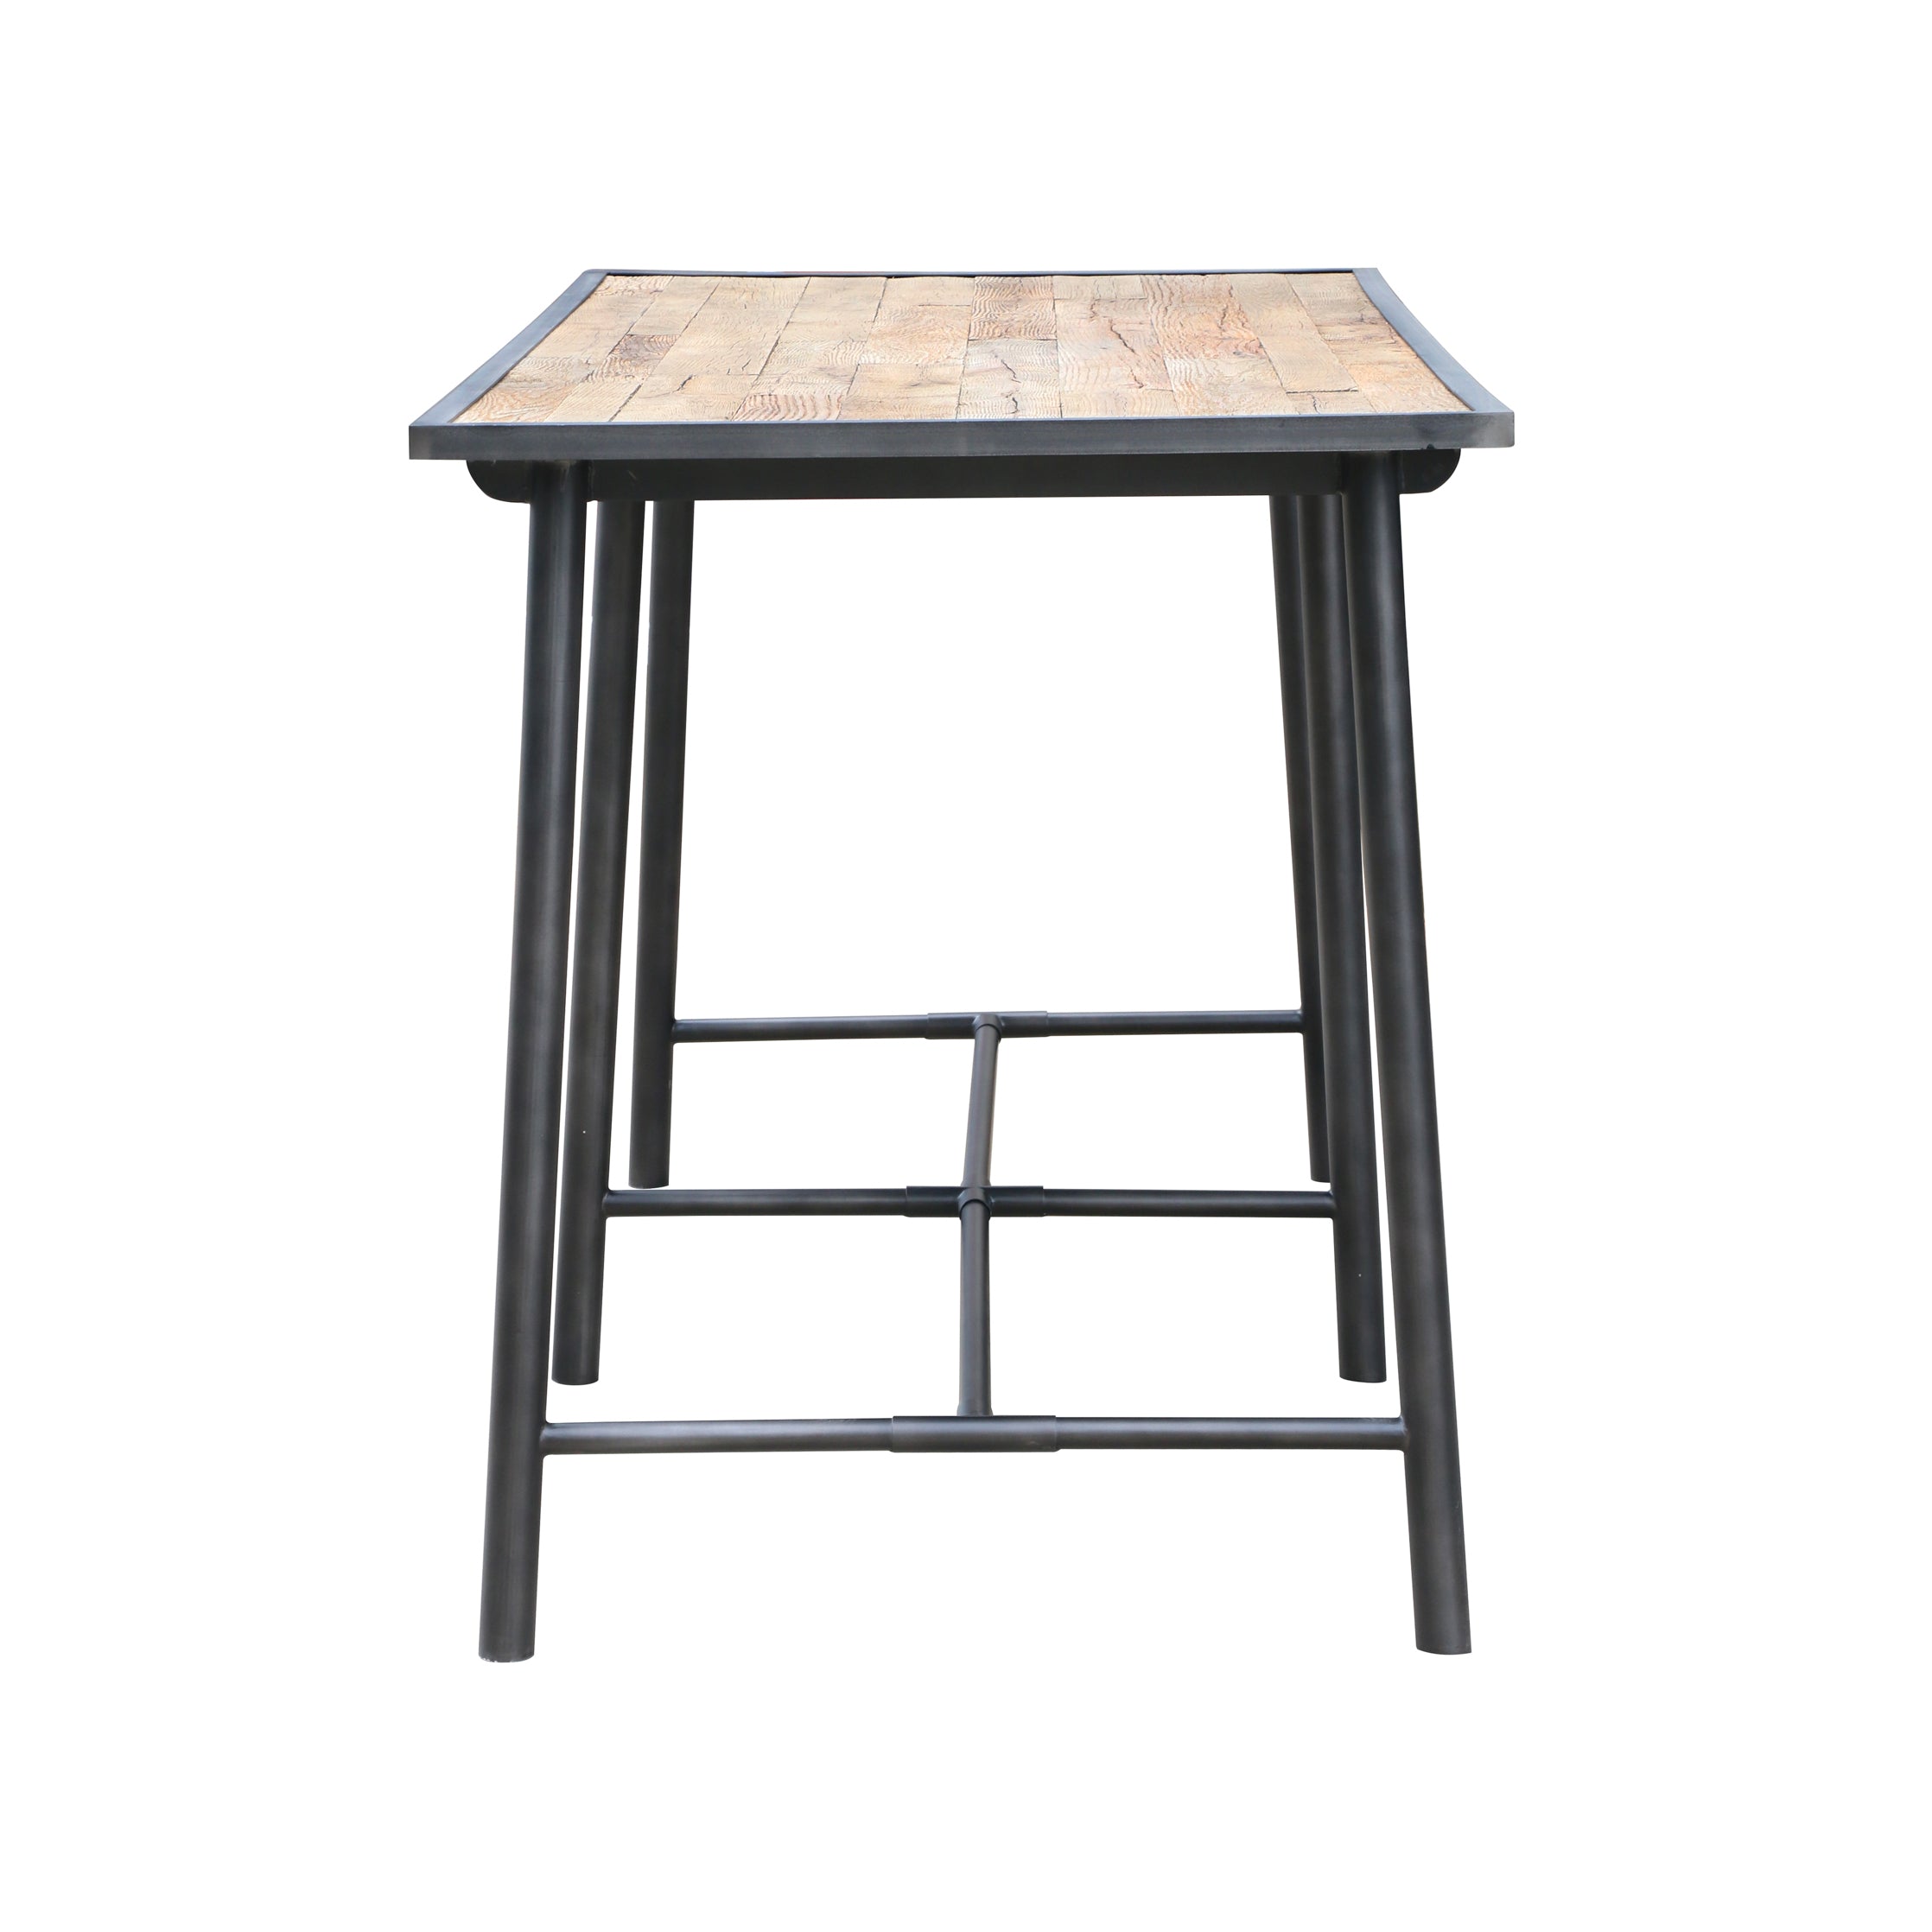 Freshly tailored shaping takes on a distinctively found feel on this Duke Bar Table - Washed Old Oak. Slim iron legs of waxed black stand tall to support a rough-hewn oak top for a clean, casual pub-style look for any patio area.   Overall Dimensions: 86.50"w x 35.75"d x 41.75"h